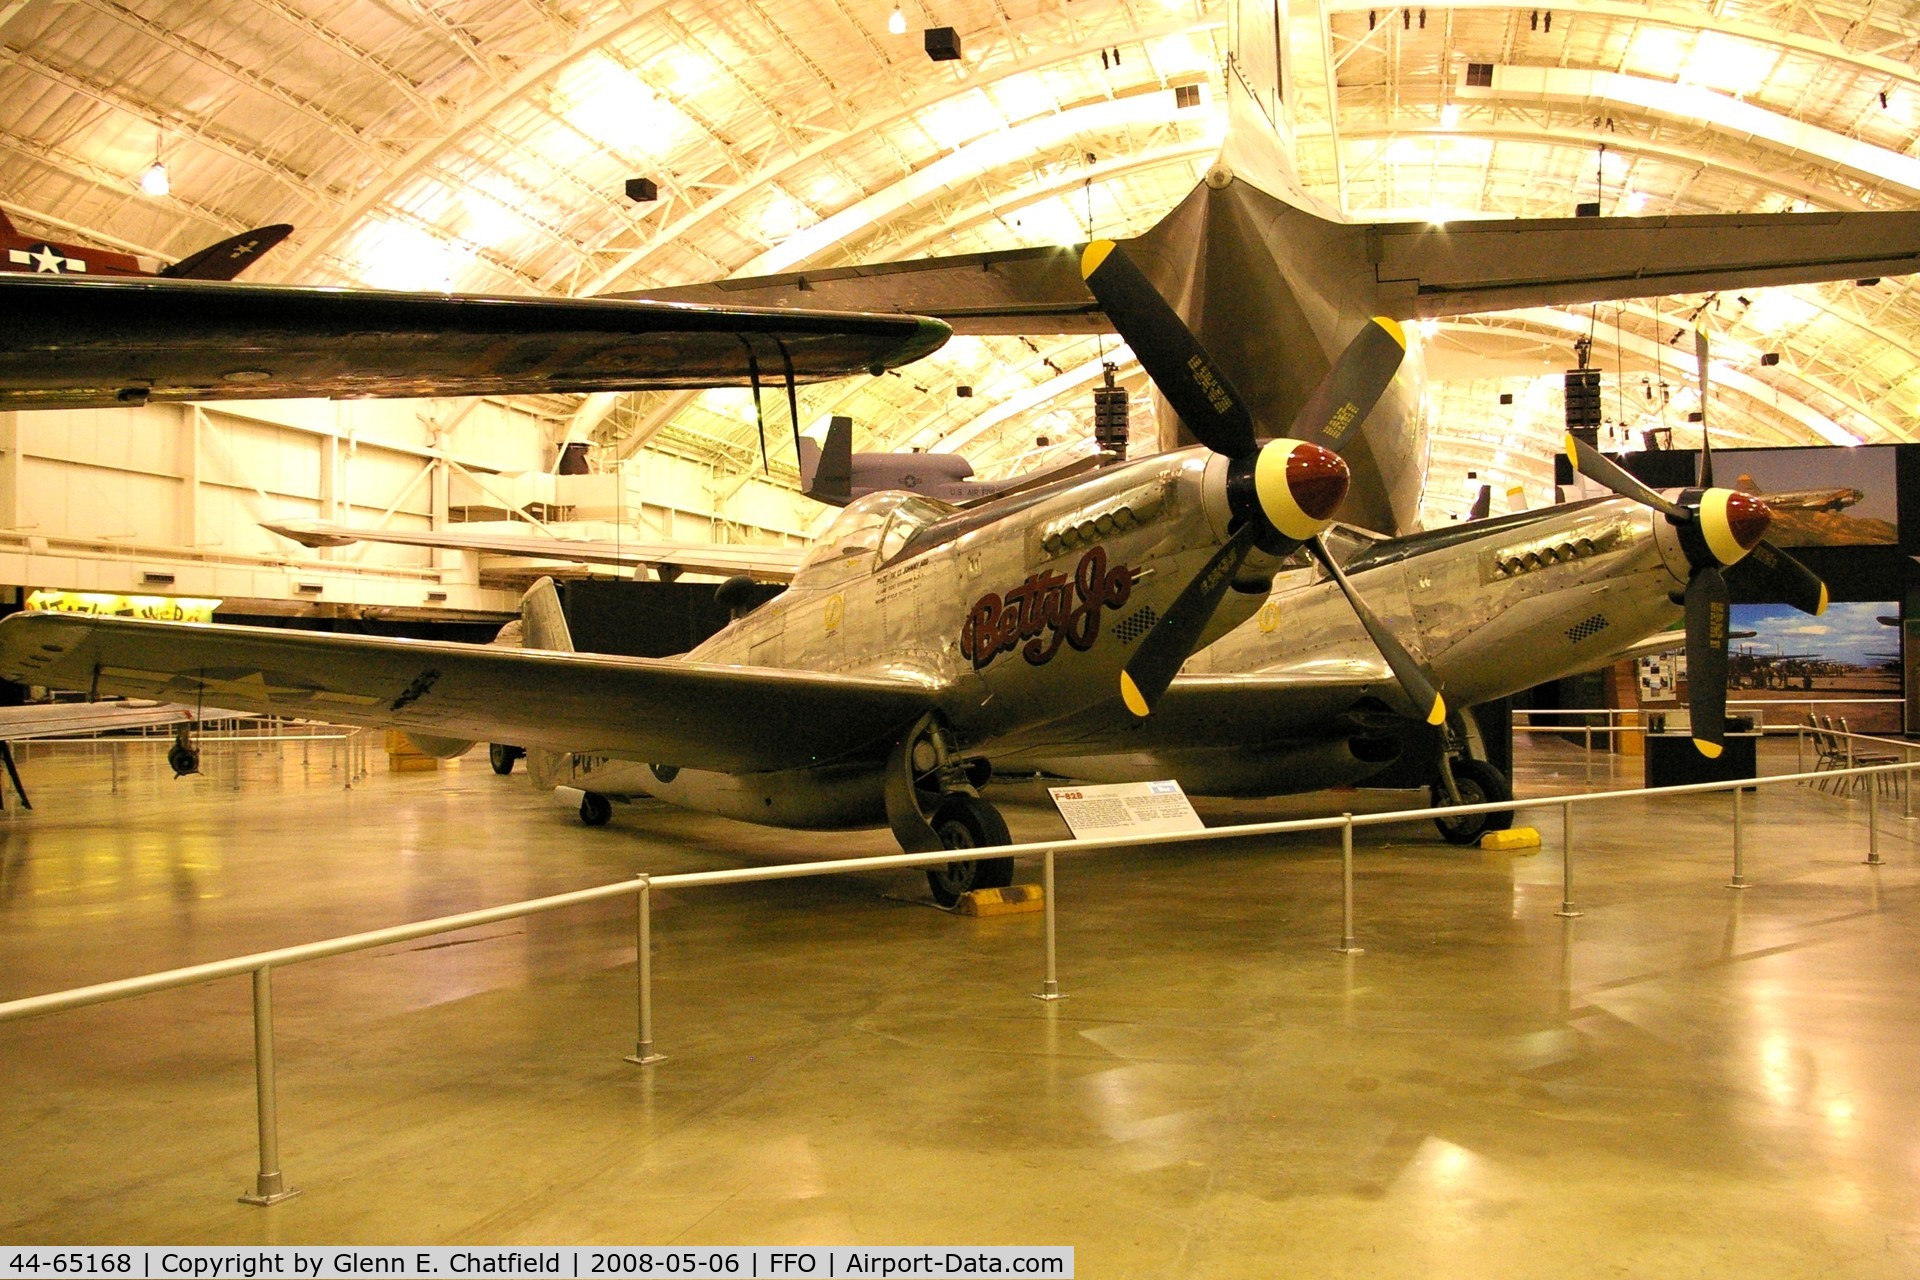 44-65168, 1944 North American P-82B Twin Mustang C/N 123-43754, Displayed at the National Museum of the U.S. Air Force